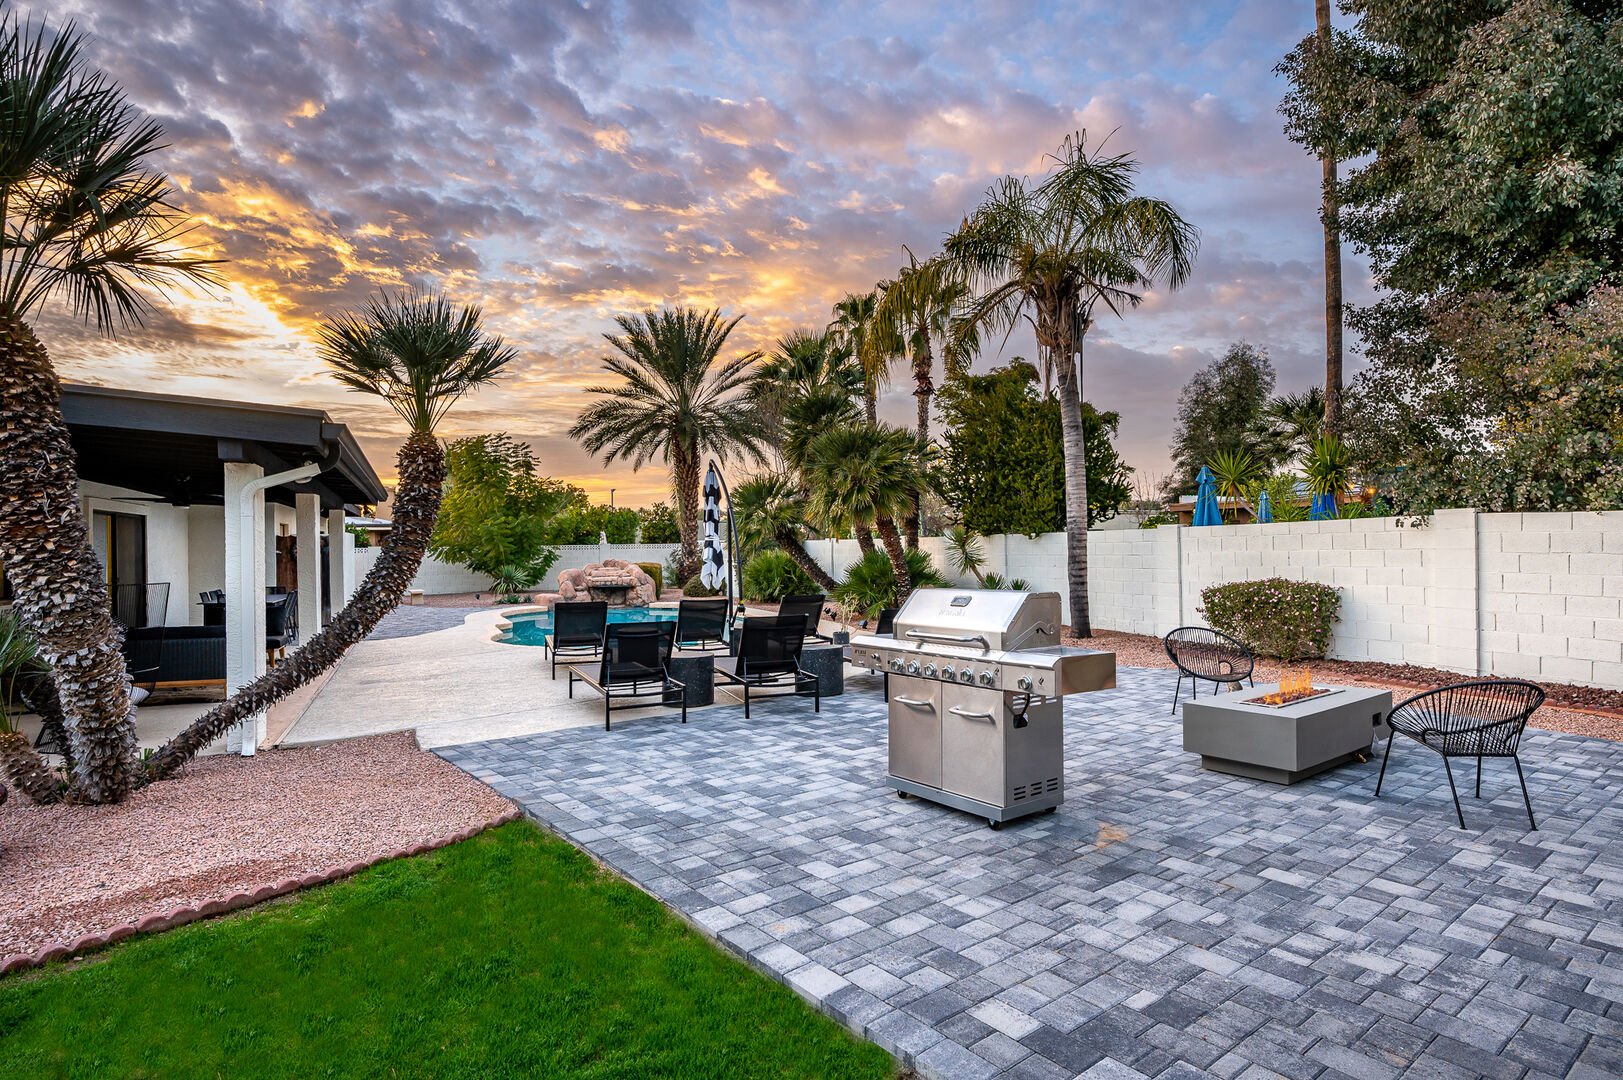 Outside grilling and lounging with the palm trees.